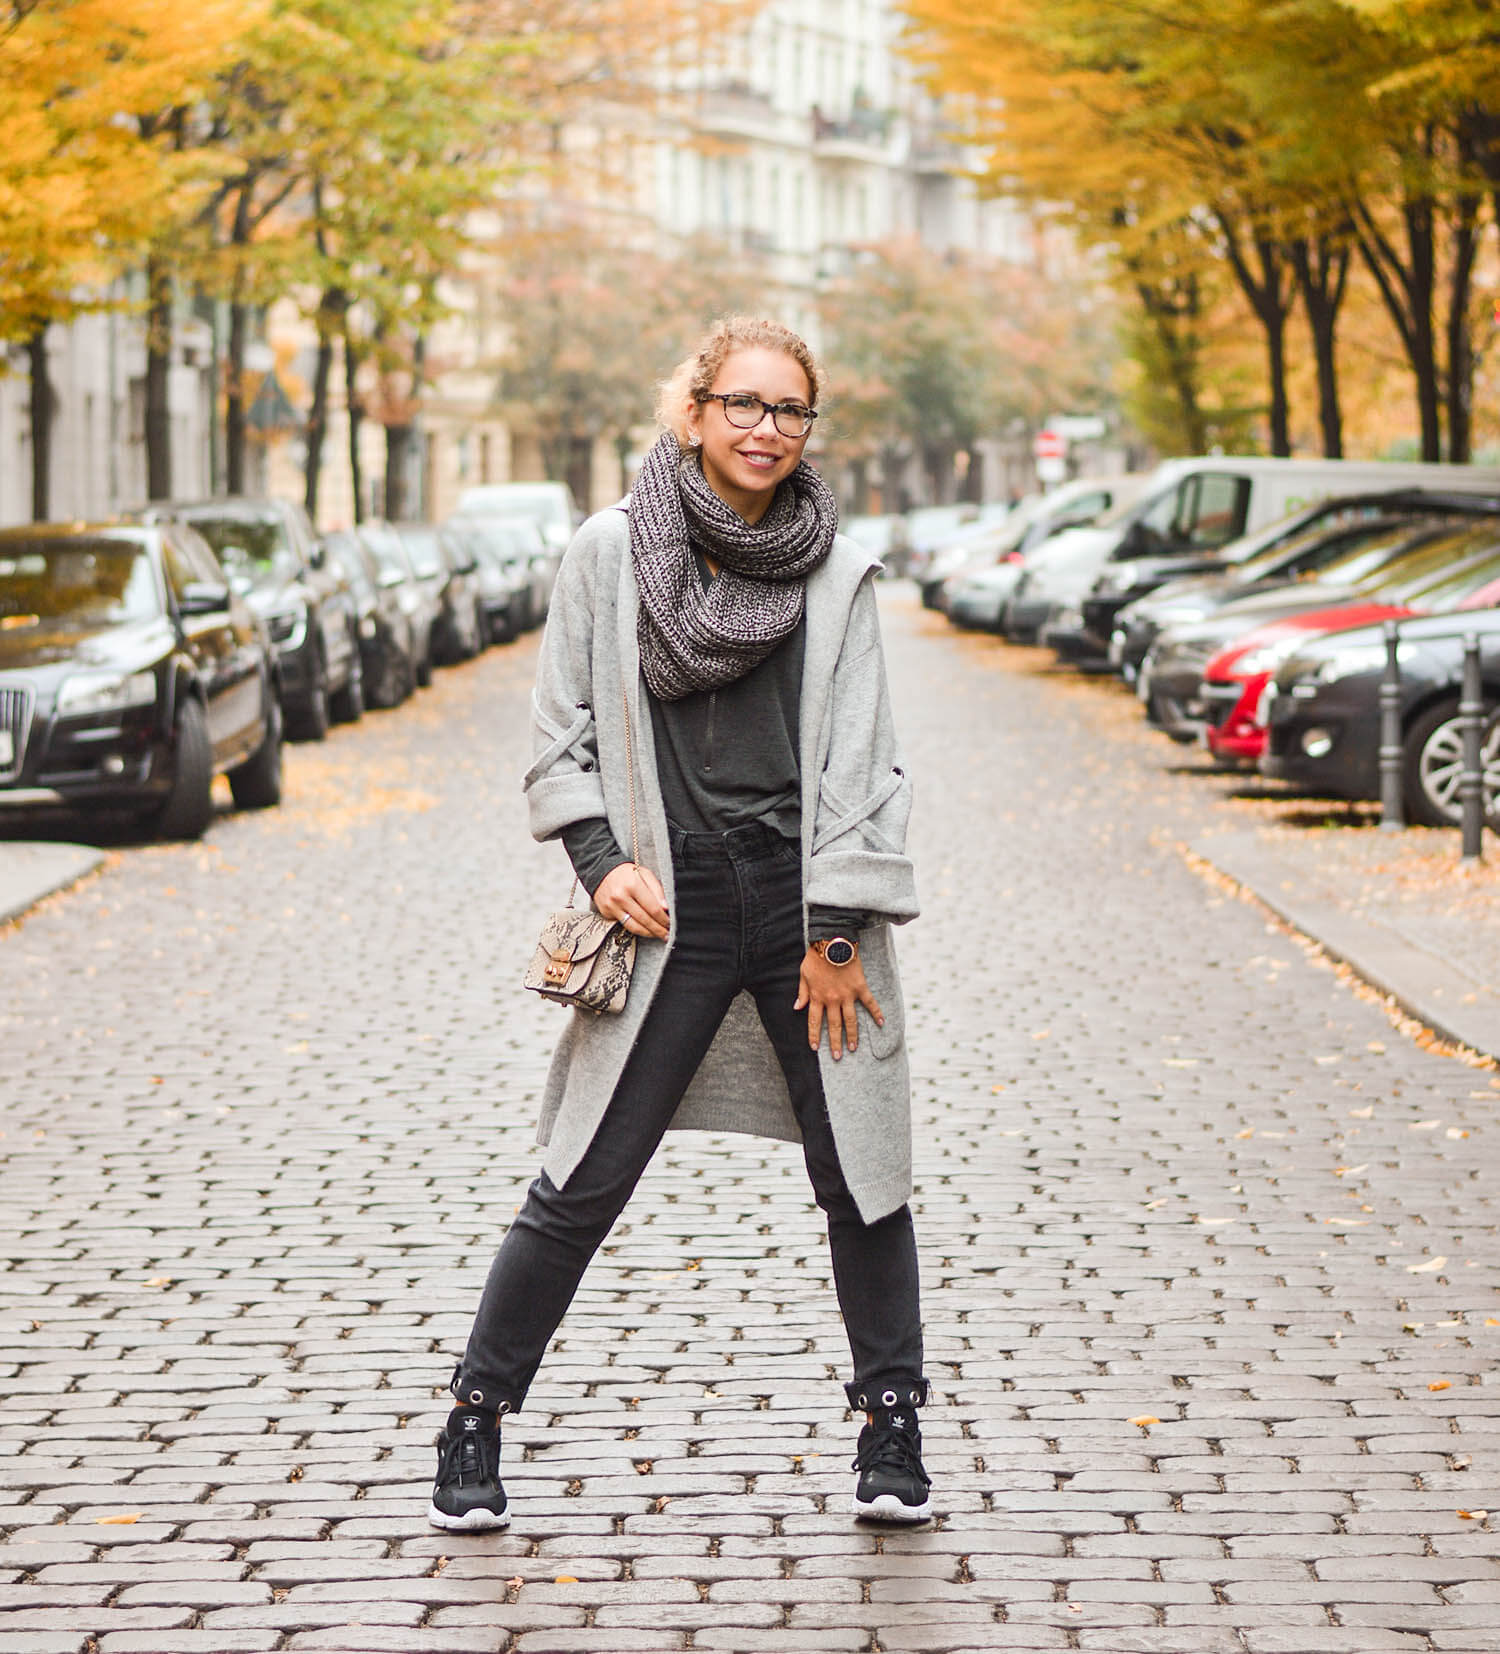 Allgrey Casual Streetstyle in Berlin Kationette Fashionblogger Germany